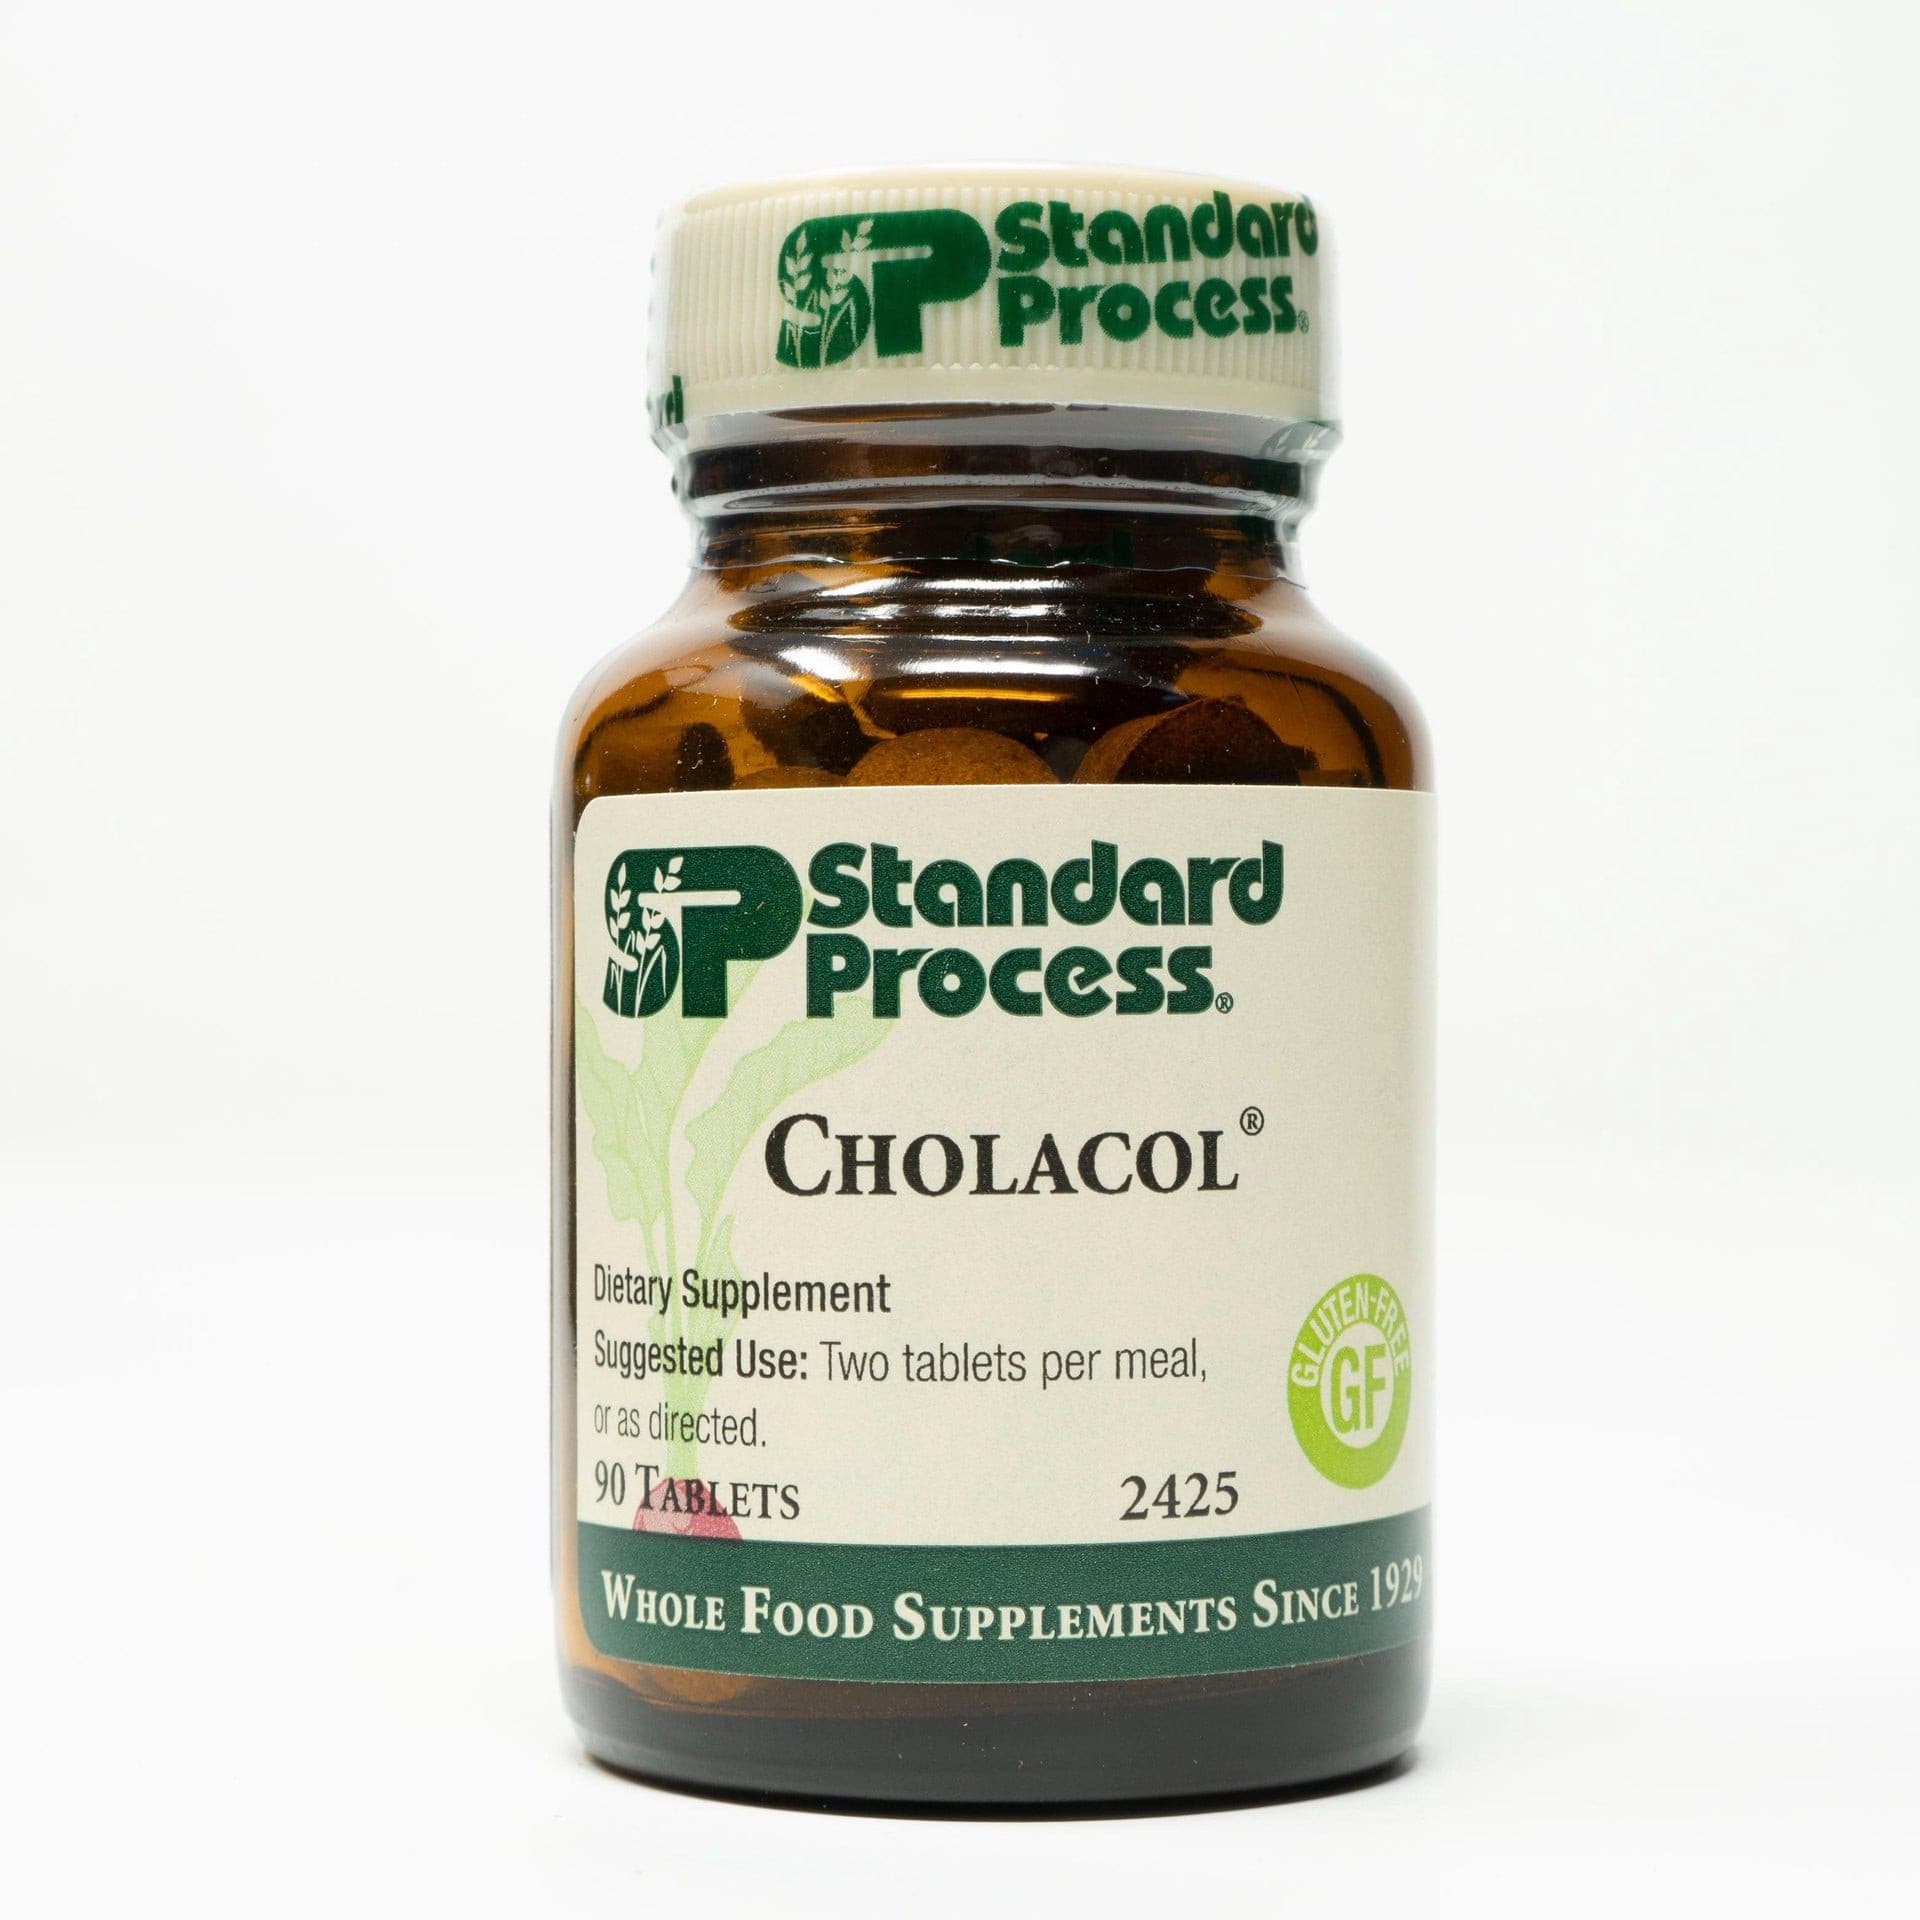 Cholacol 90 Tablets.